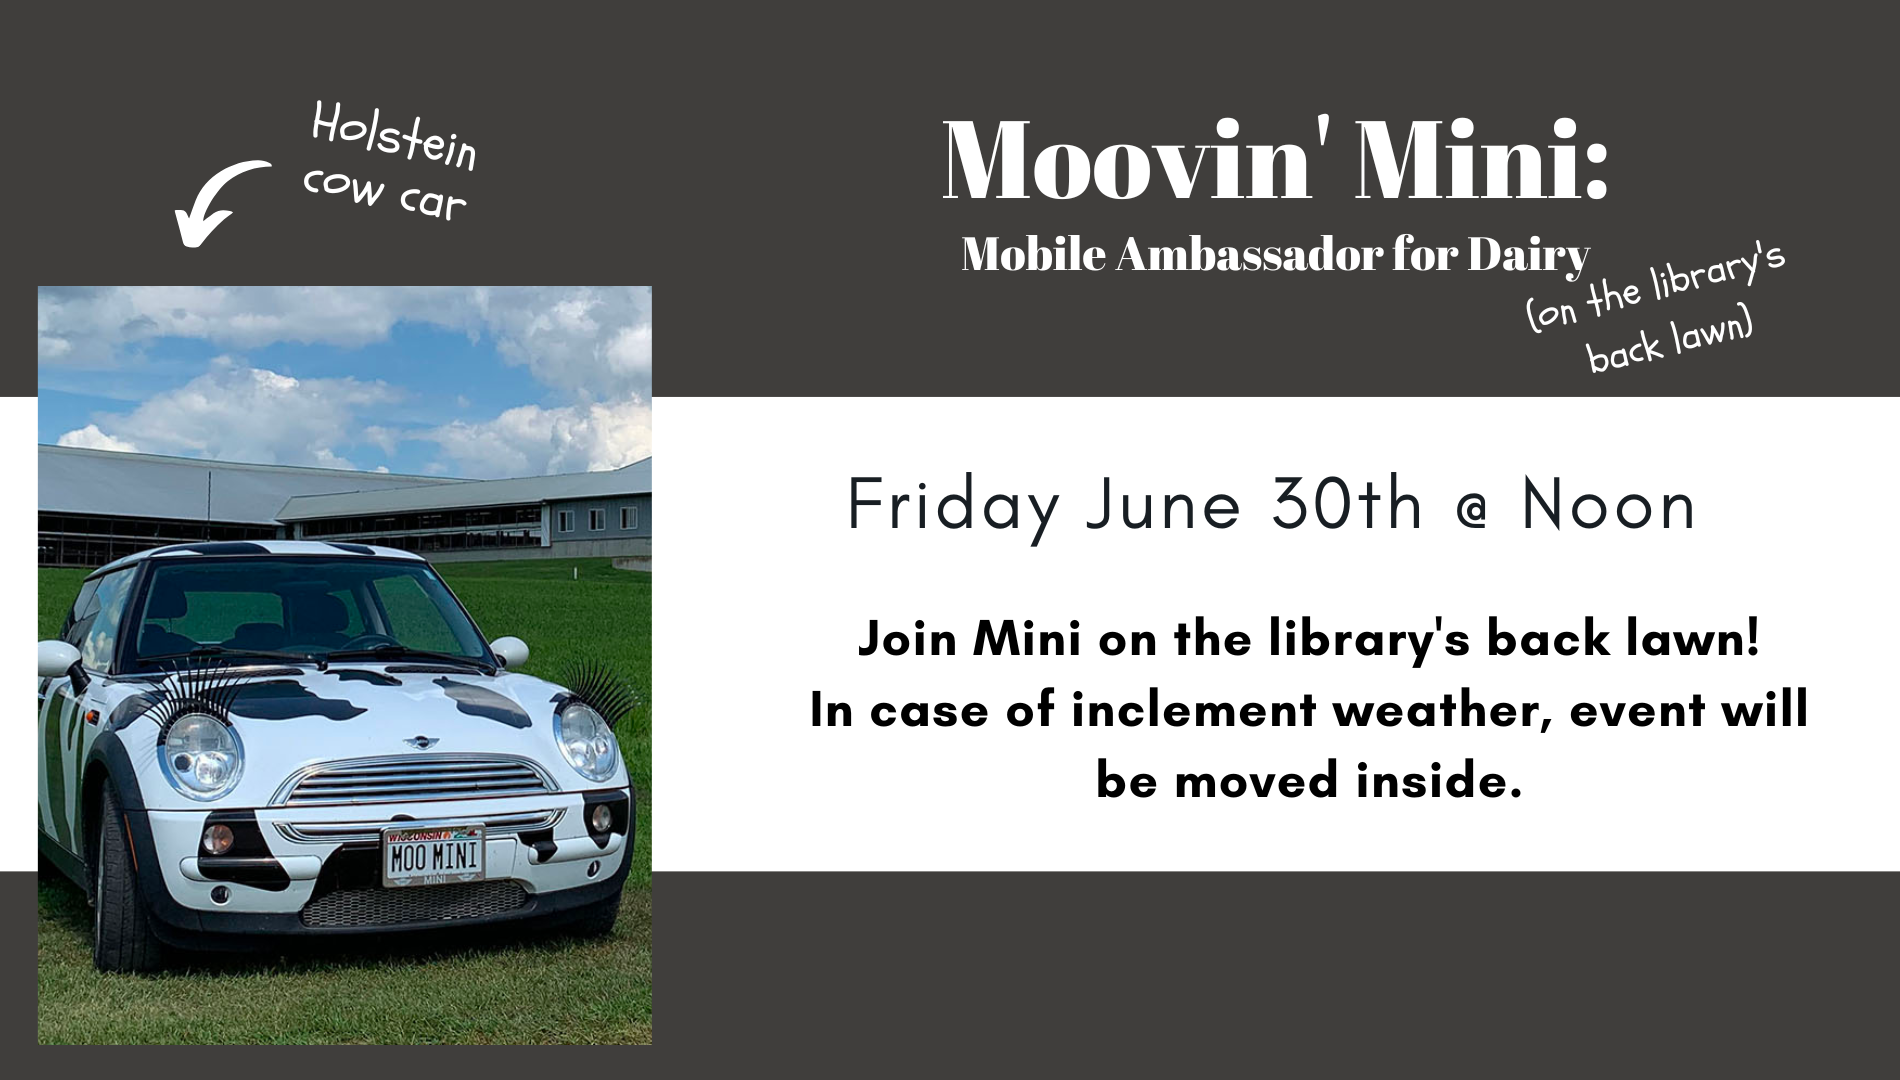 Moovin' Mini will be on the library's back lawn for a story time.